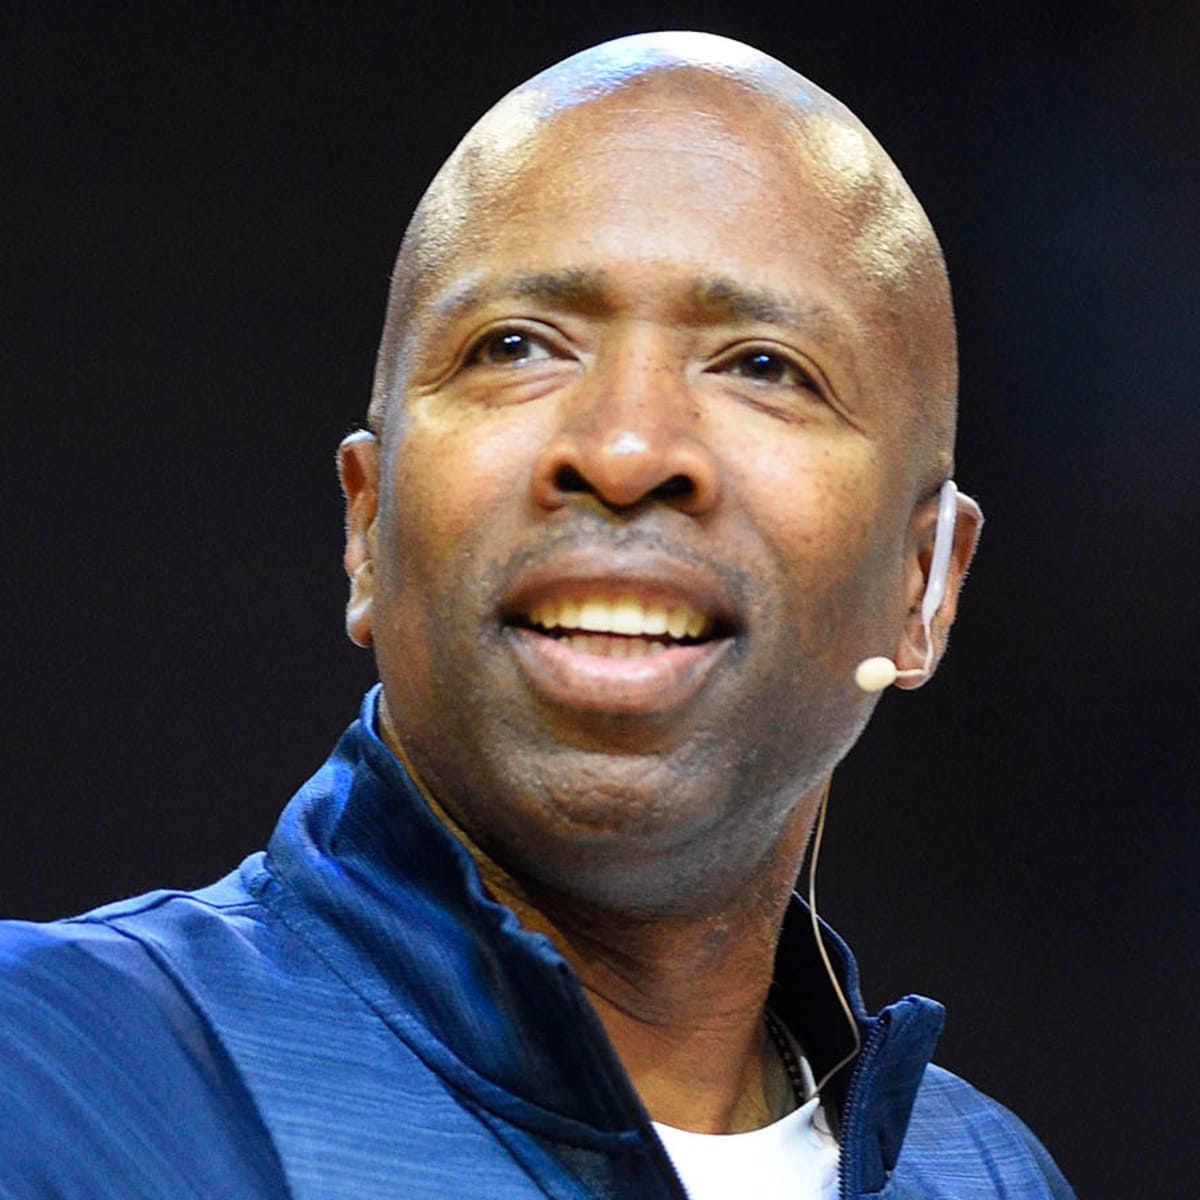 Skraldespand rester plasticitet Kenny Smith: Michael Jordan and NBA's decision to highlight social justice  - Sports Illustrated